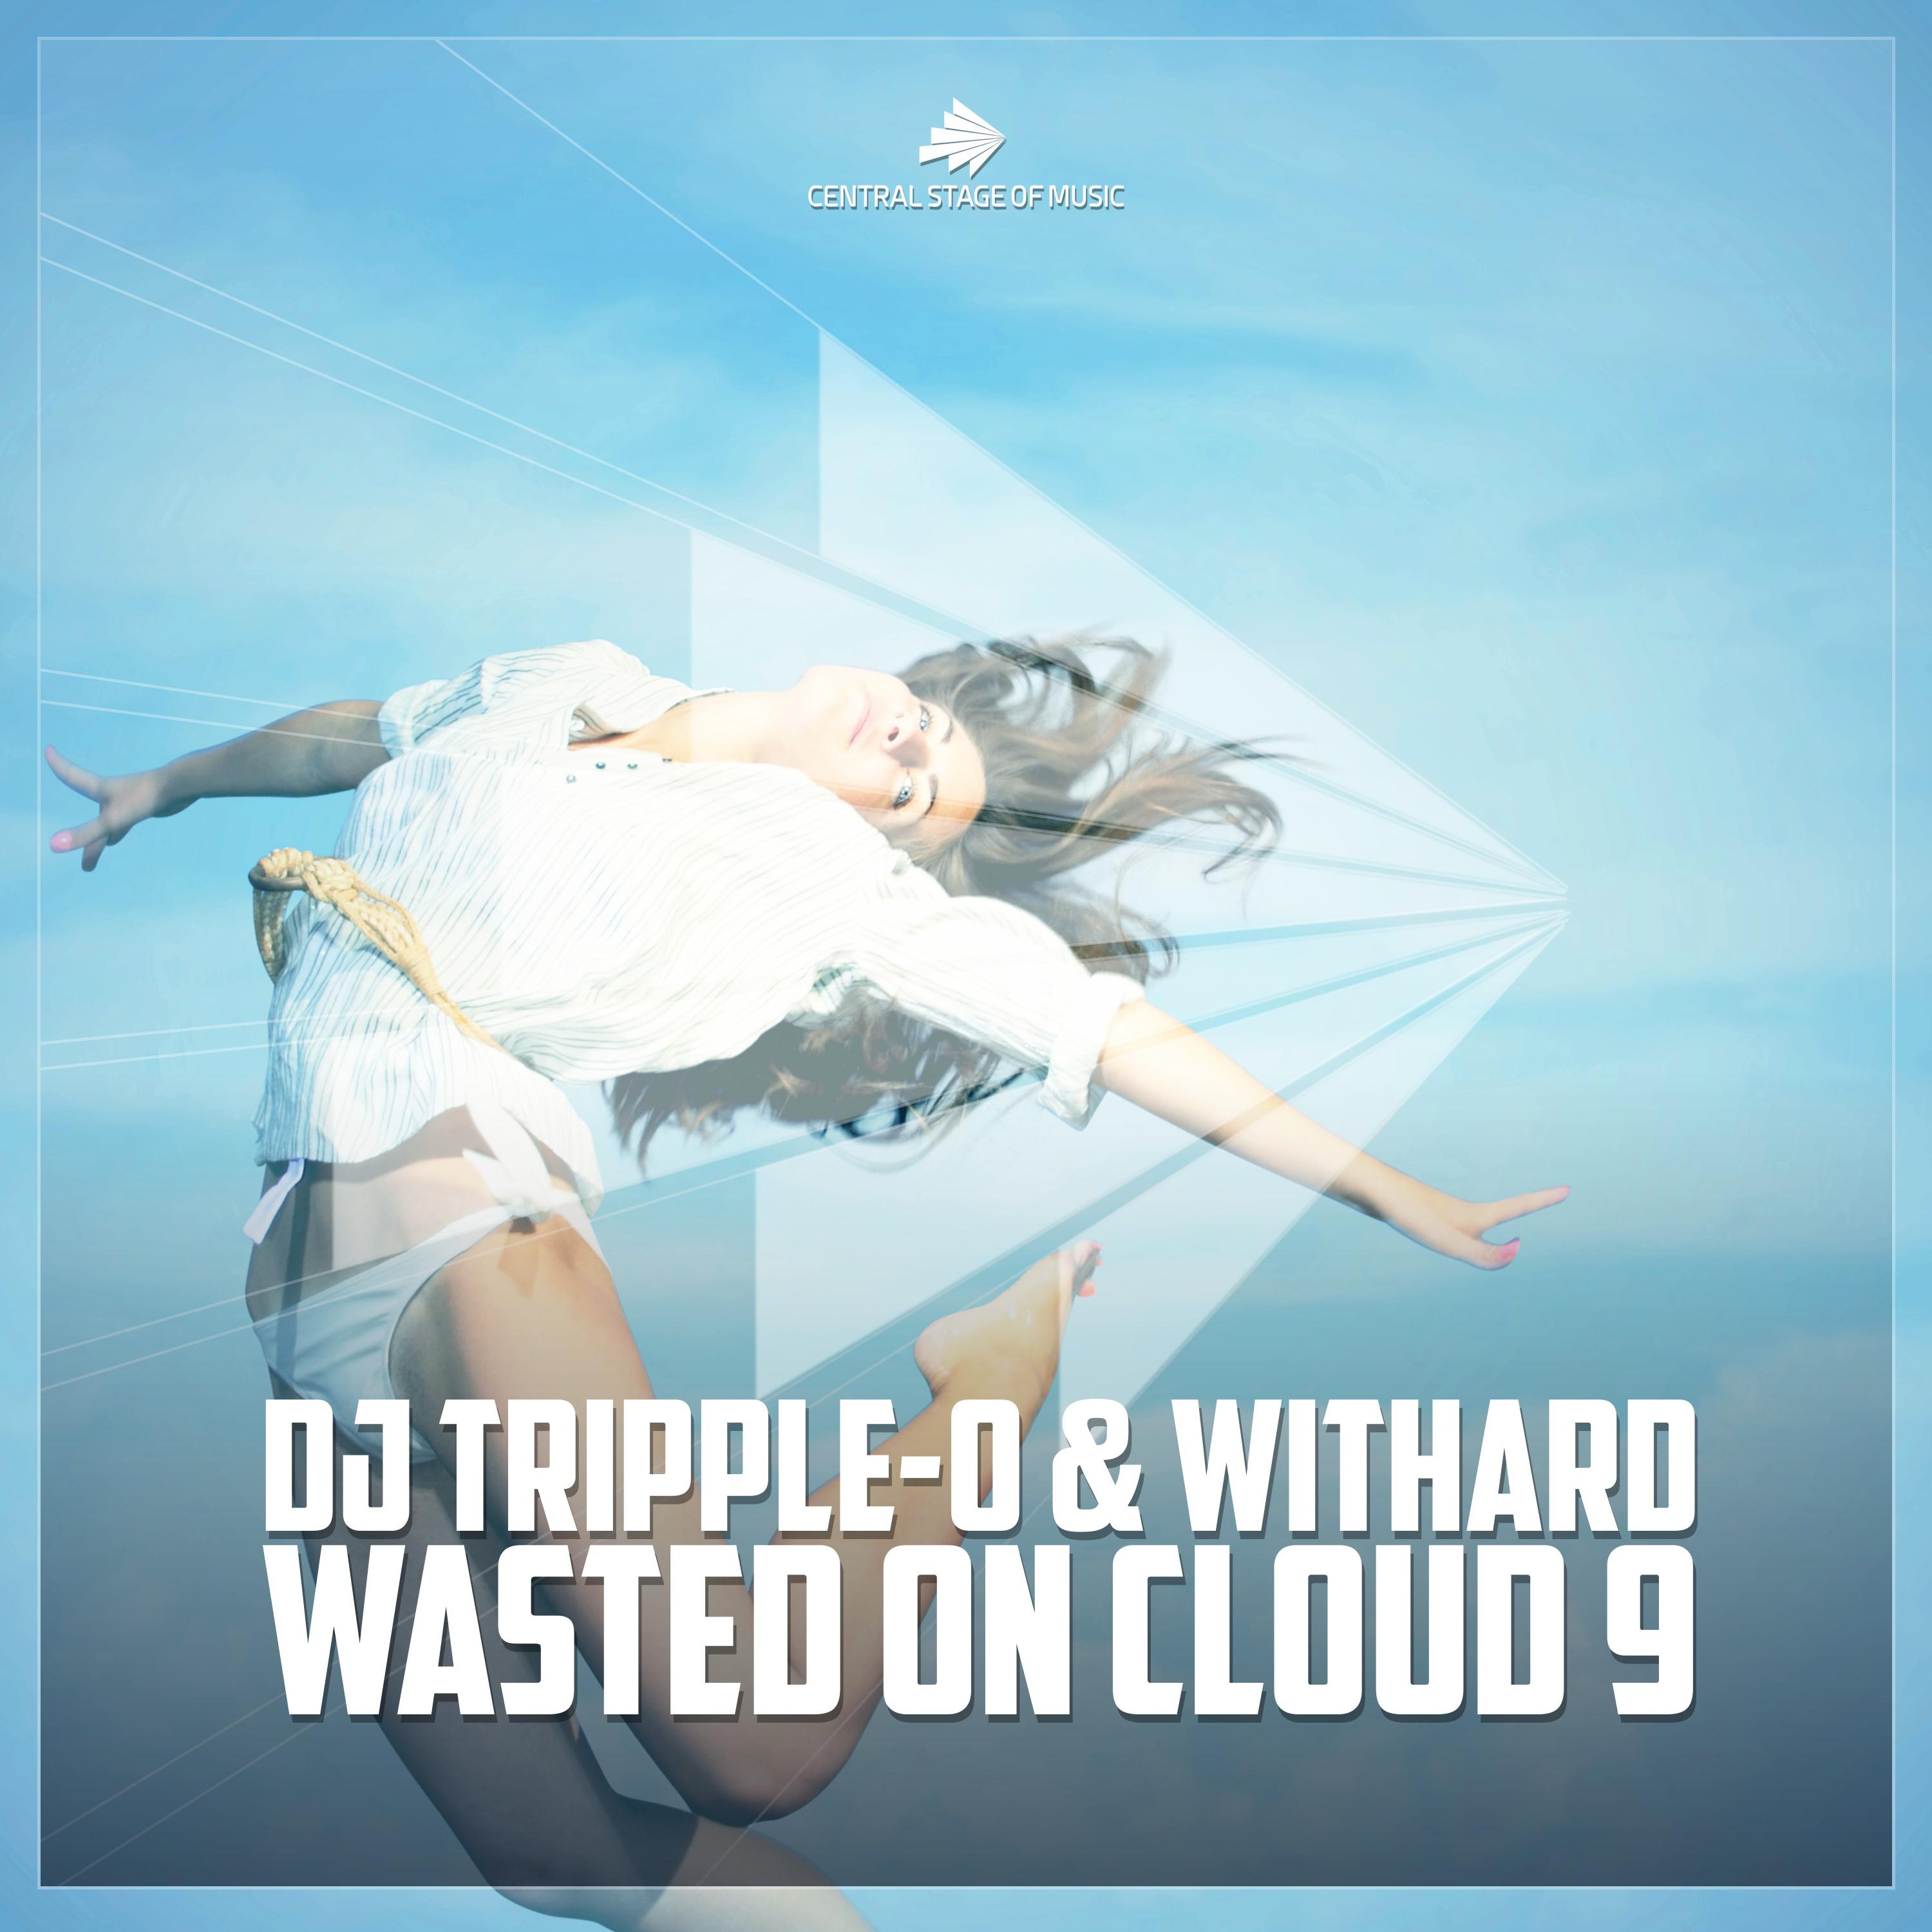 Wasted on Cloud 9 (Cueboy & Tribune Remix)